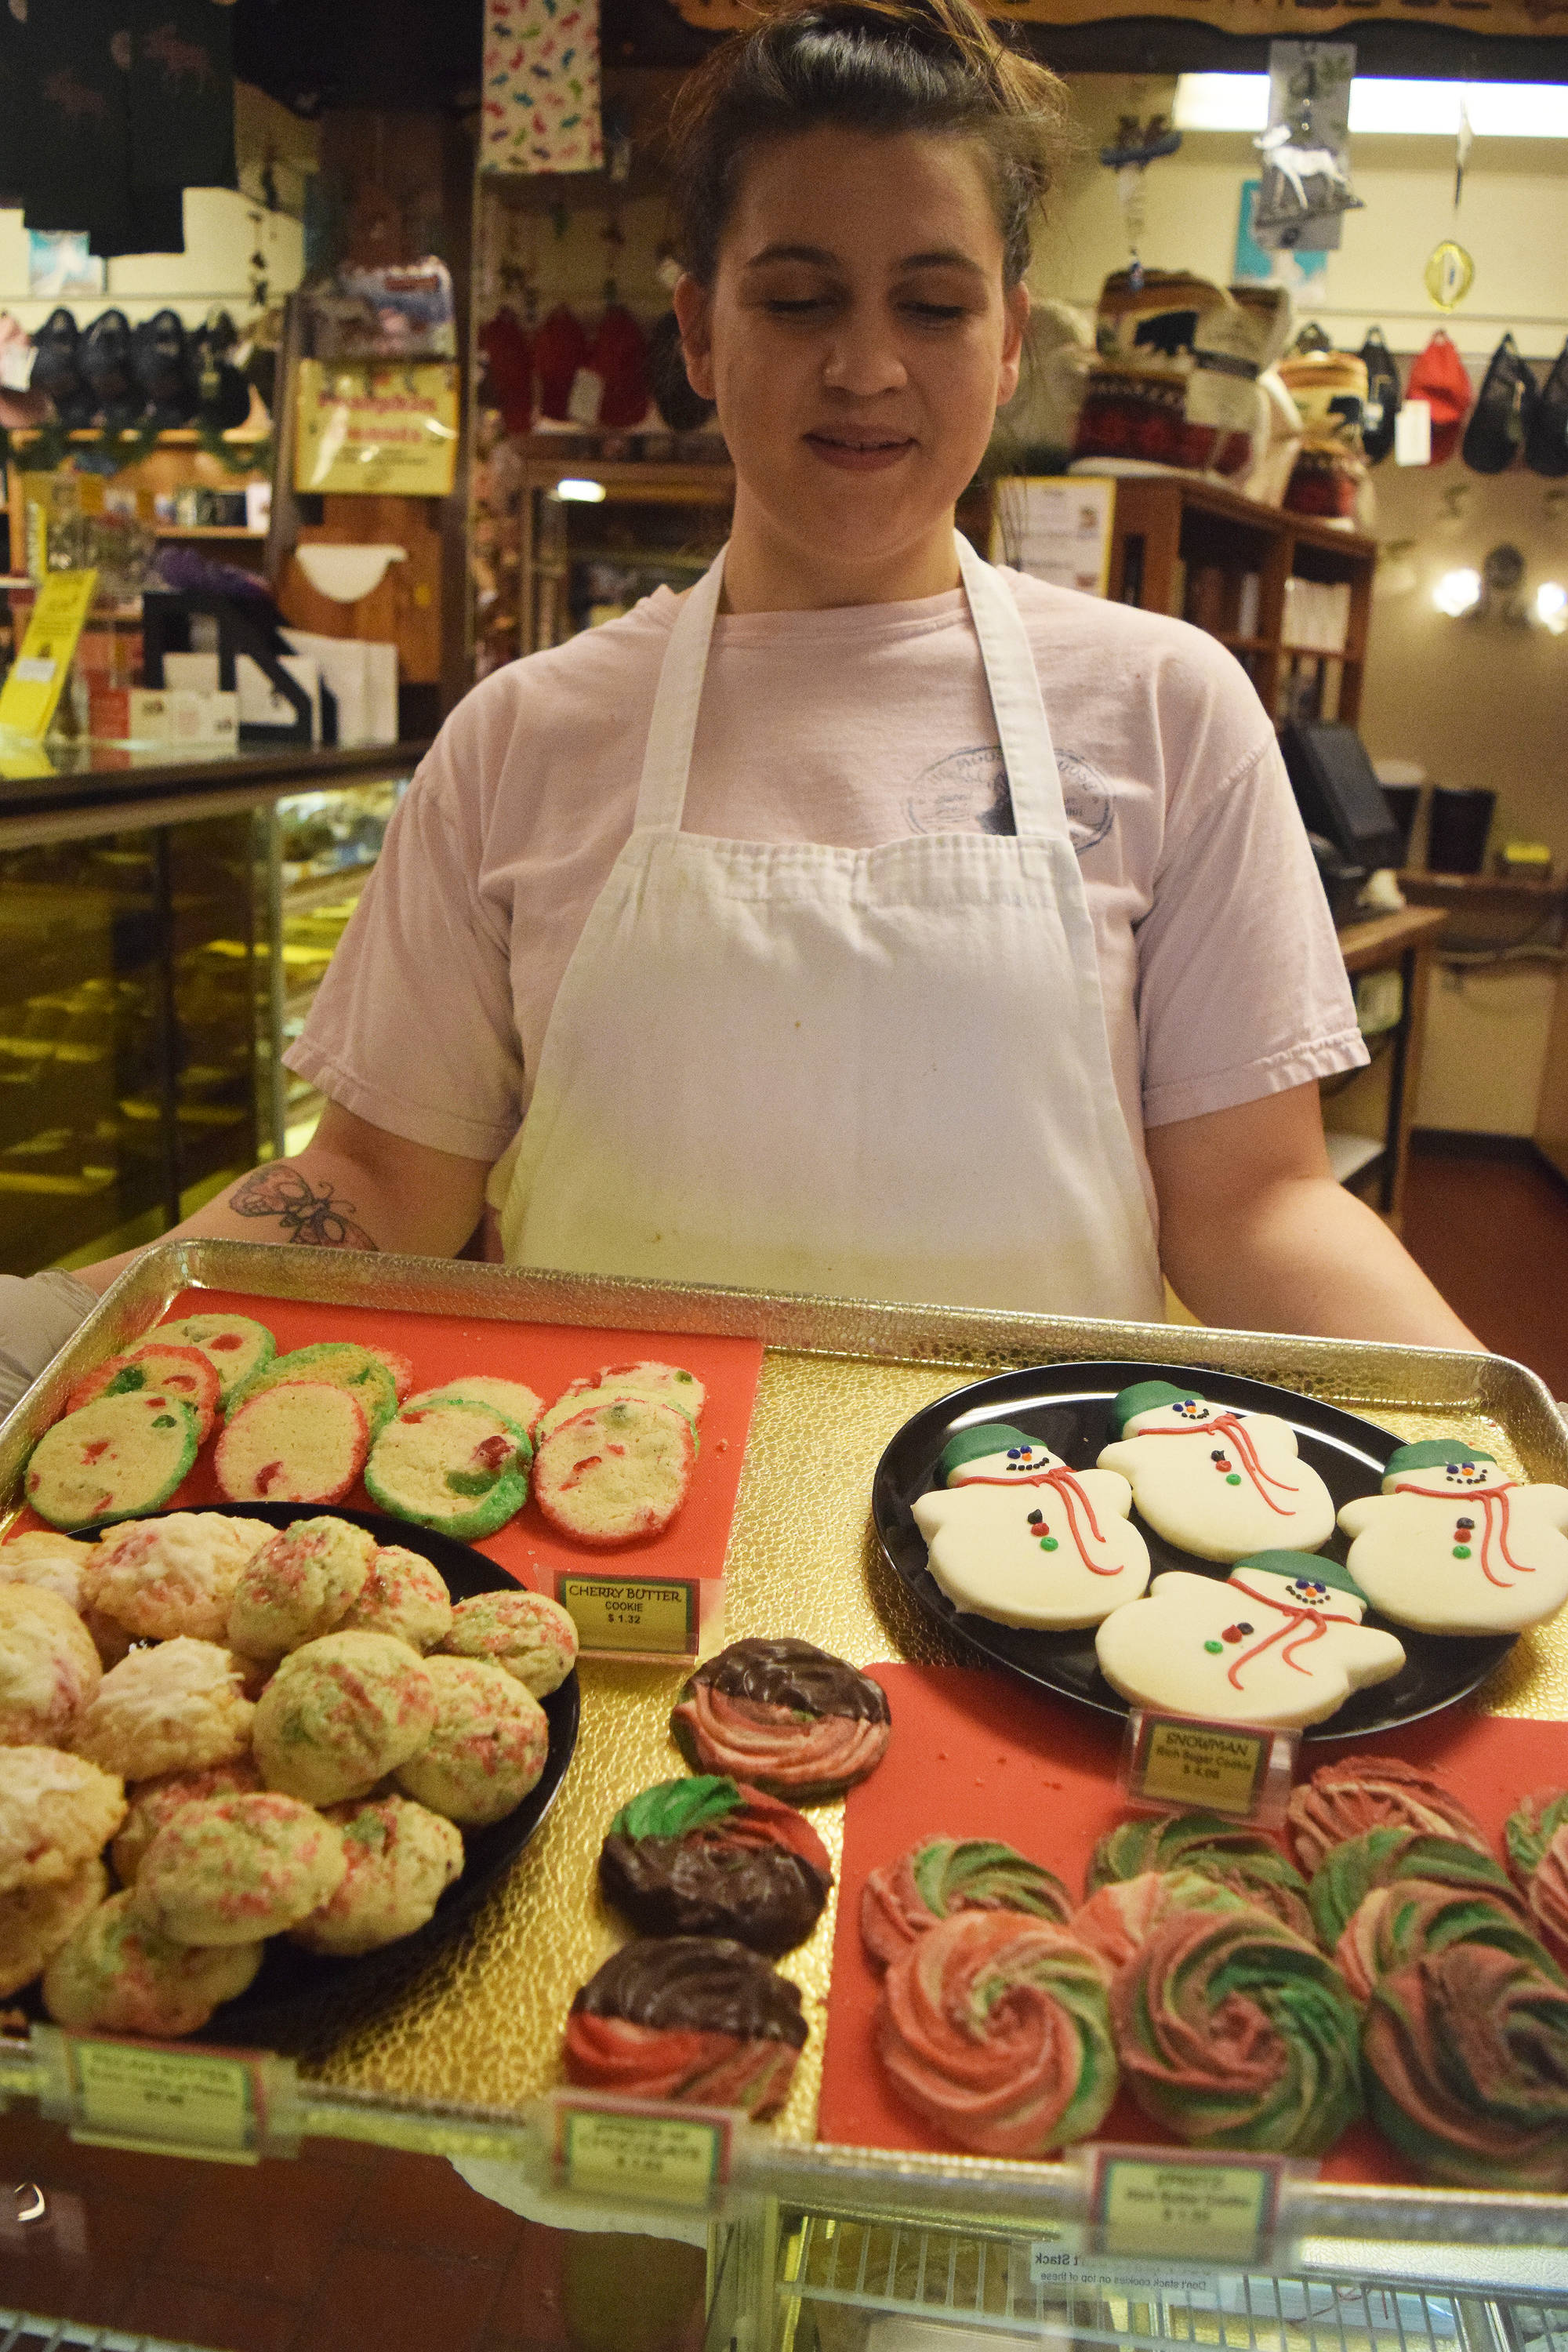 The Moose is Loose employee Elainnah Lagoutaris displays a pan of holiday-themed cookies Tuesday afternoon at the popular bakery in Soldotna. (Photo by Joey Klecka/Peninsula Clarion)